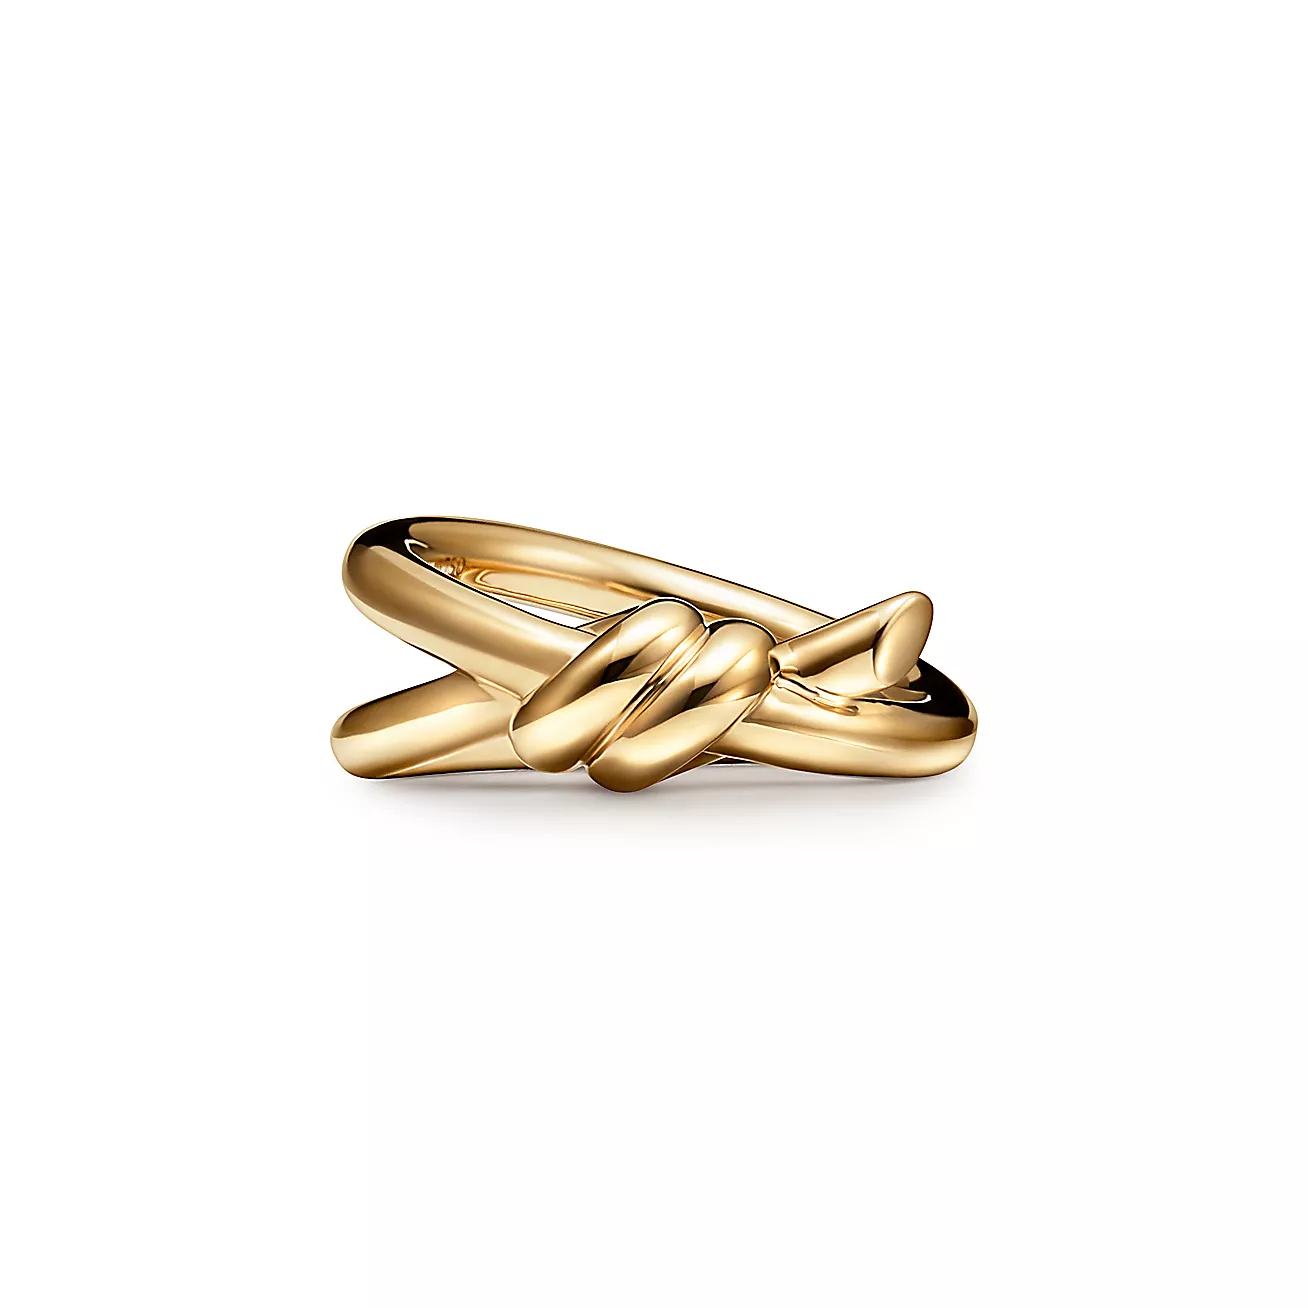 Tiffany Knot Double Row Ring in 18k Gold